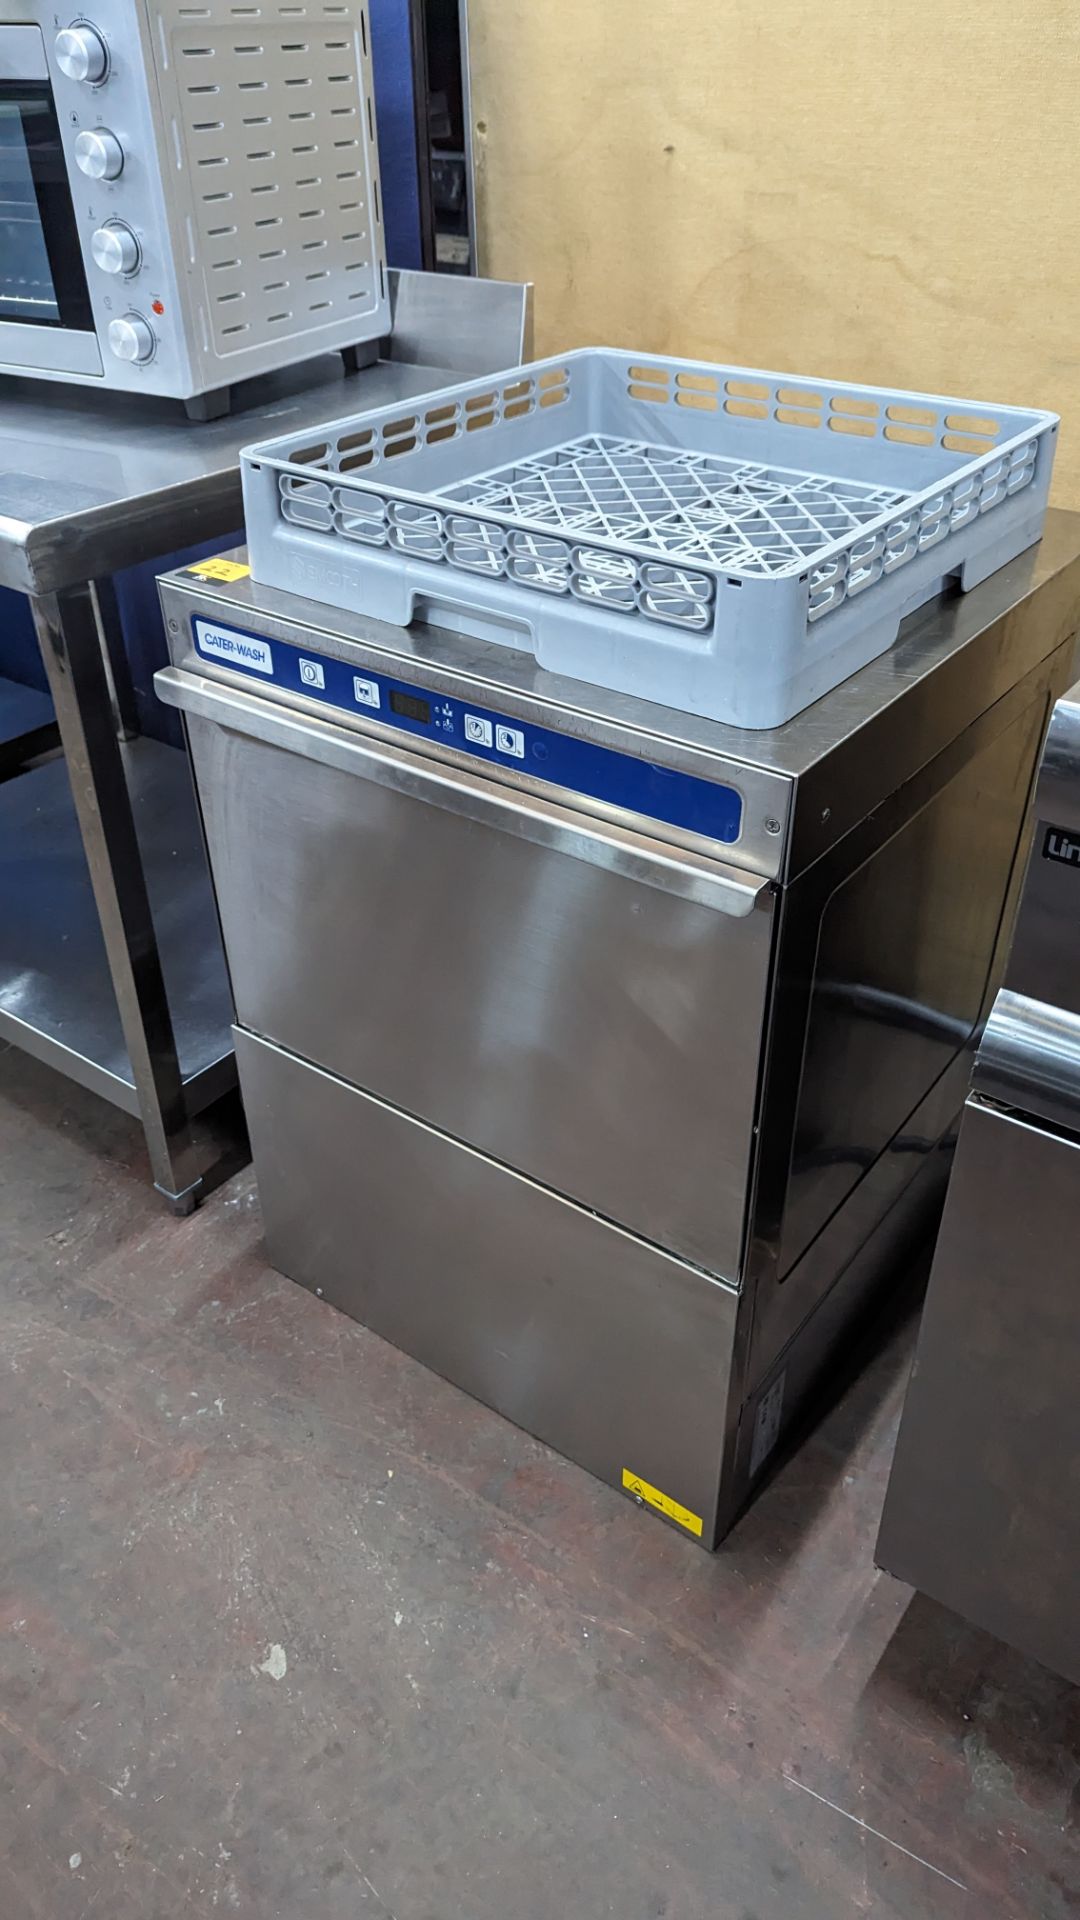 Cater-Wash stainless steel commercial dishwasher including a total of 3 trays - Image 2 of 9